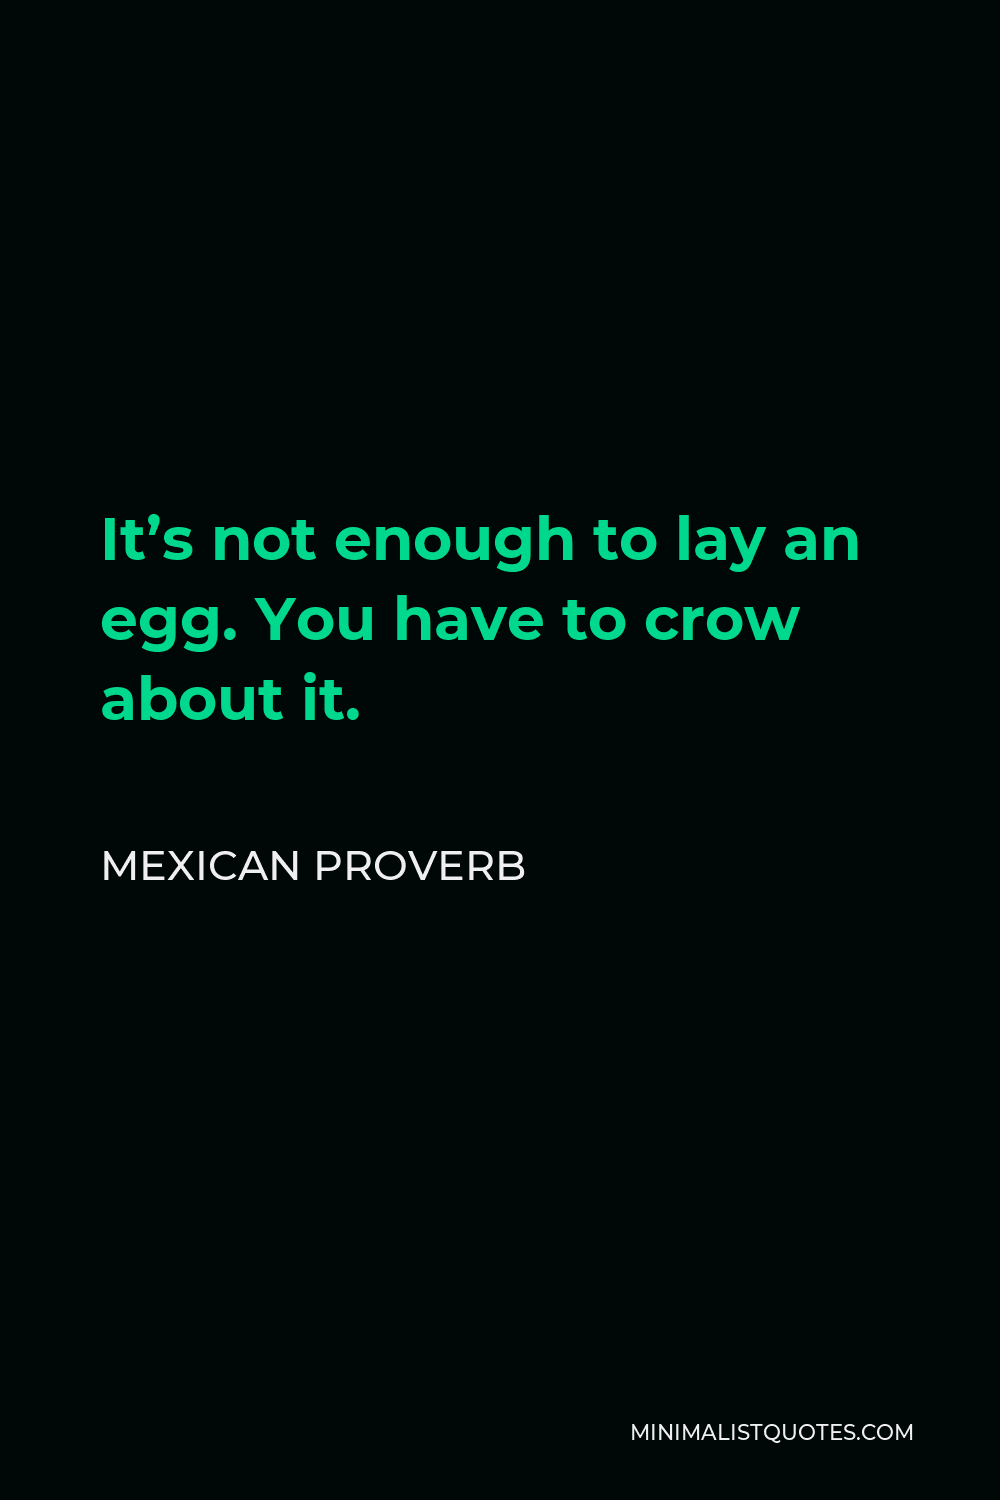 Mexican Proverb Quote - It’s not enough to lay an egg. You have to crow about it.